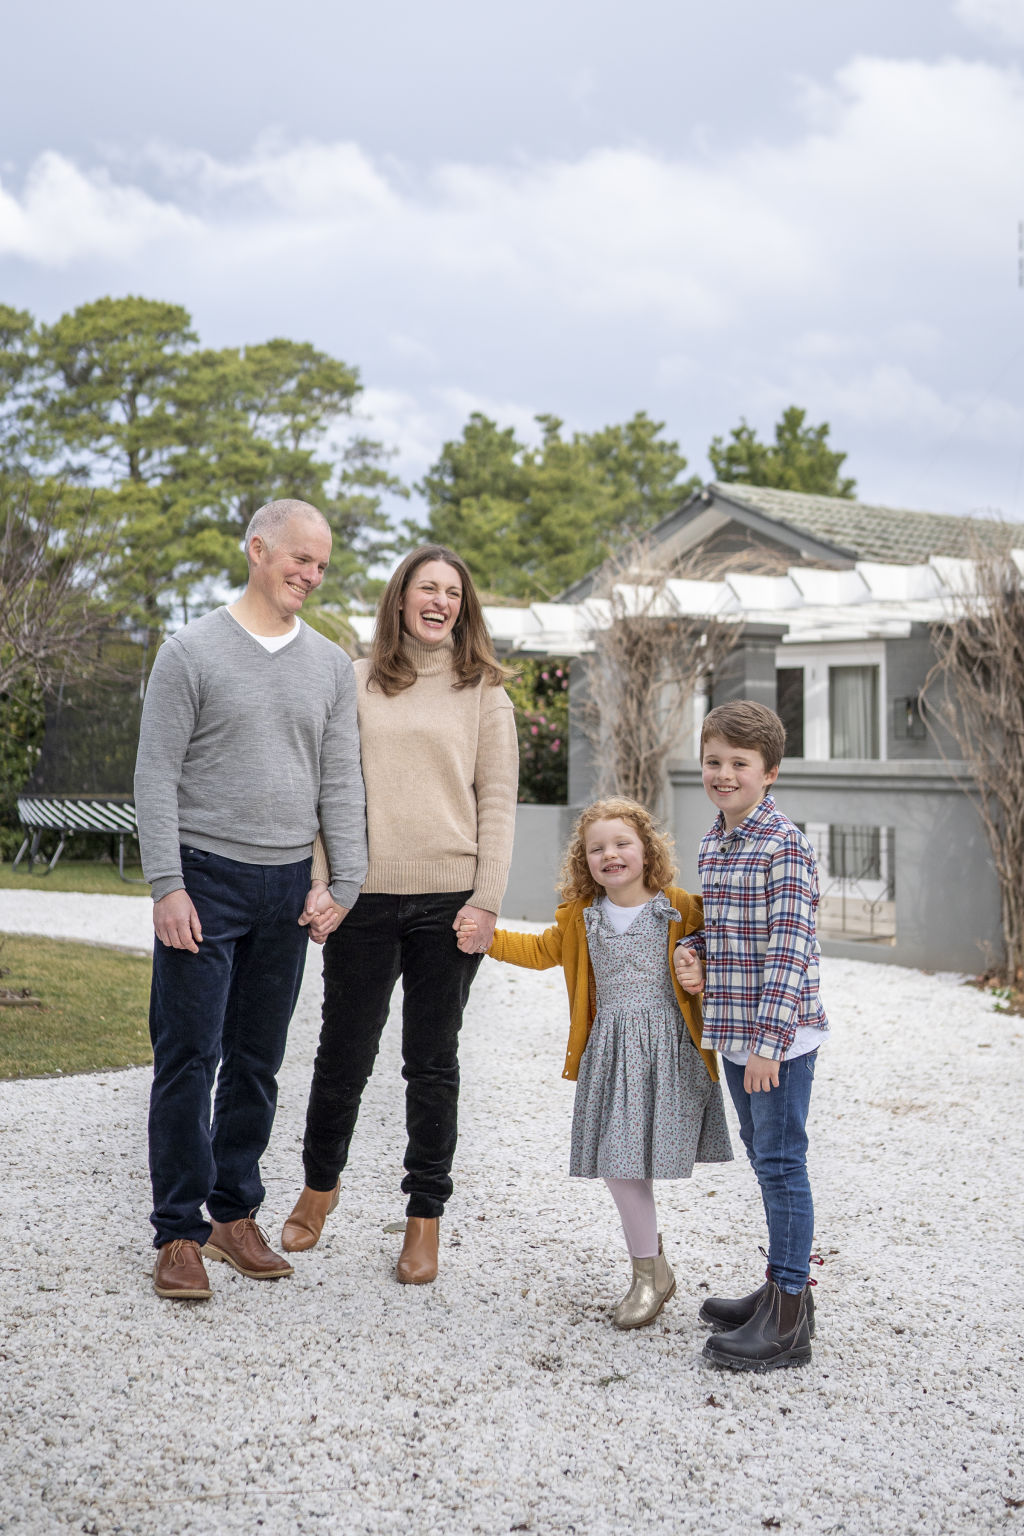 Amelia and David Jones with their children Darcy and Charlotte. Photo: Peter Izzard